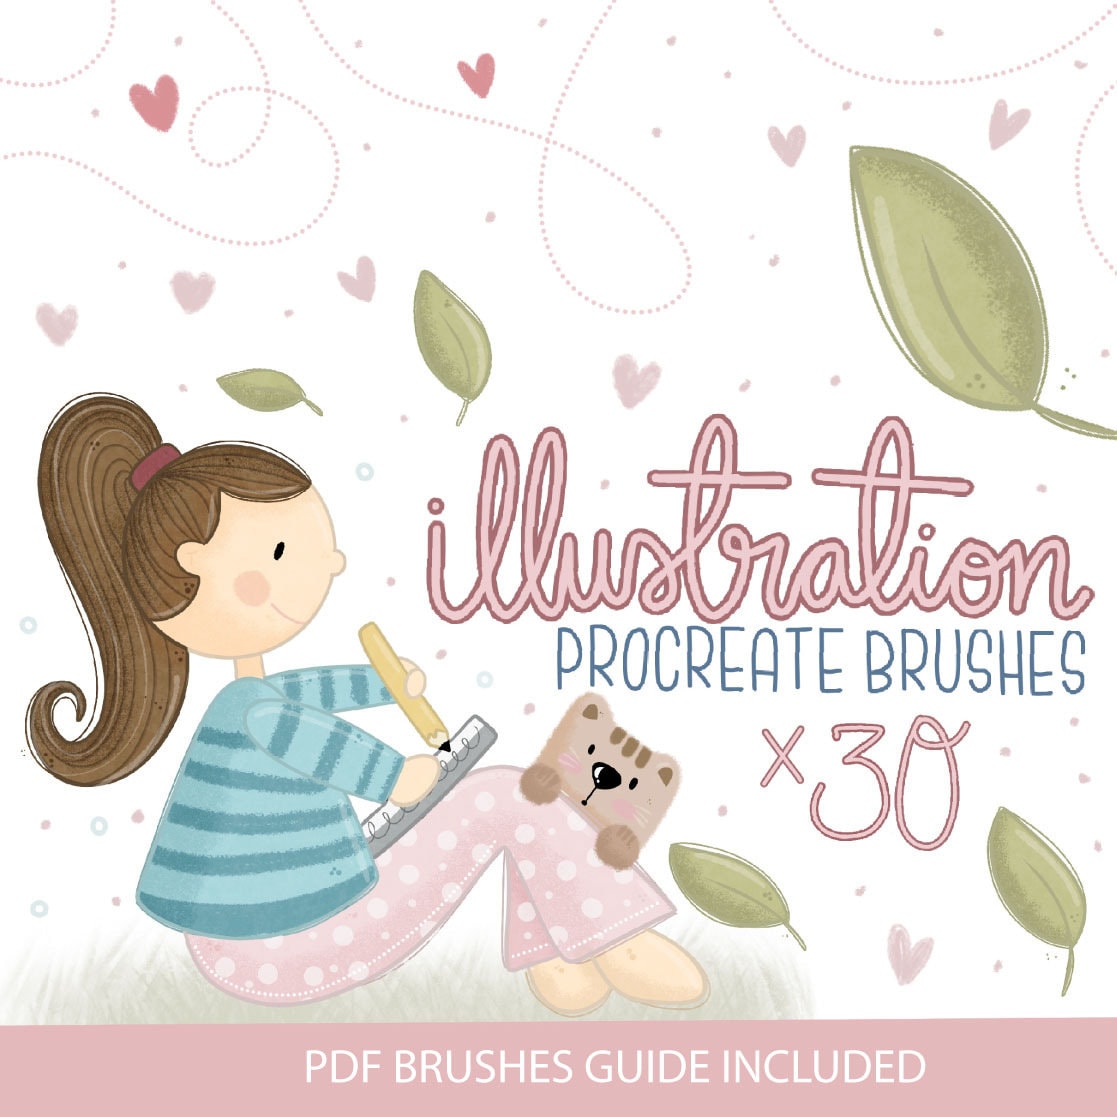 42 Procreate Brushes Children Book Drawing Kit, Color Palettes